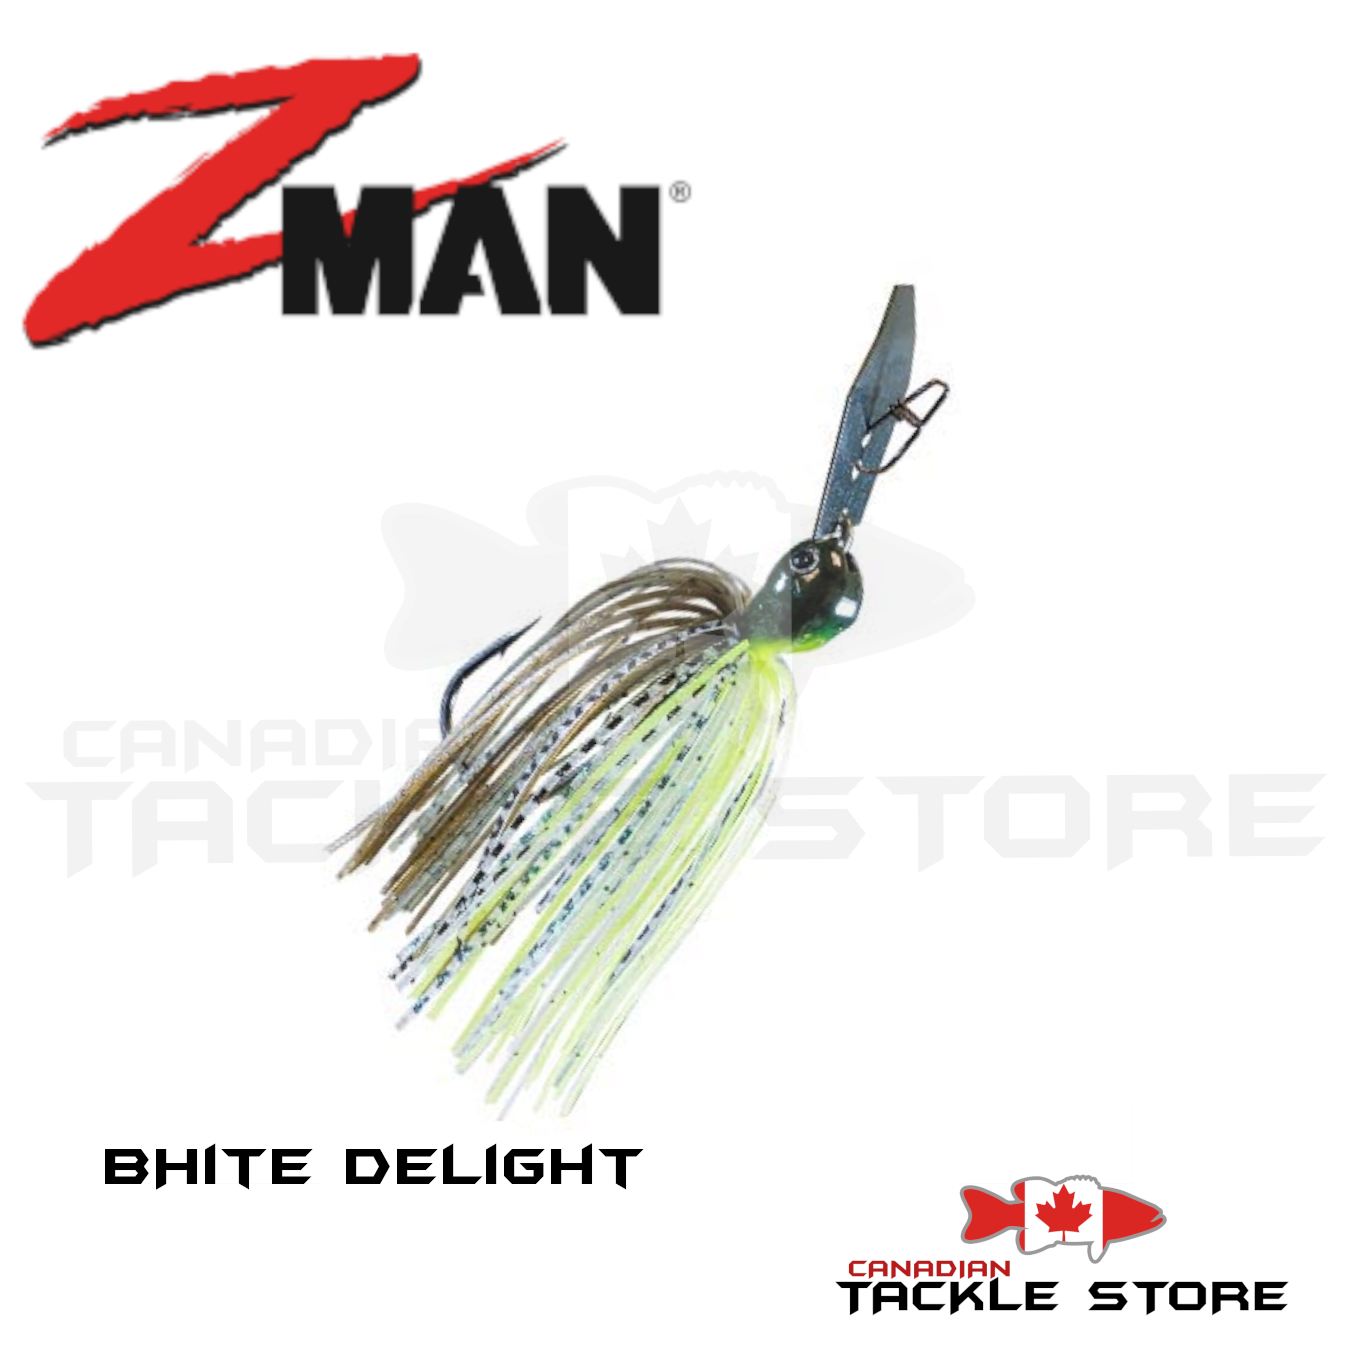 Z-Man GOAT – Canadian Tackle Store